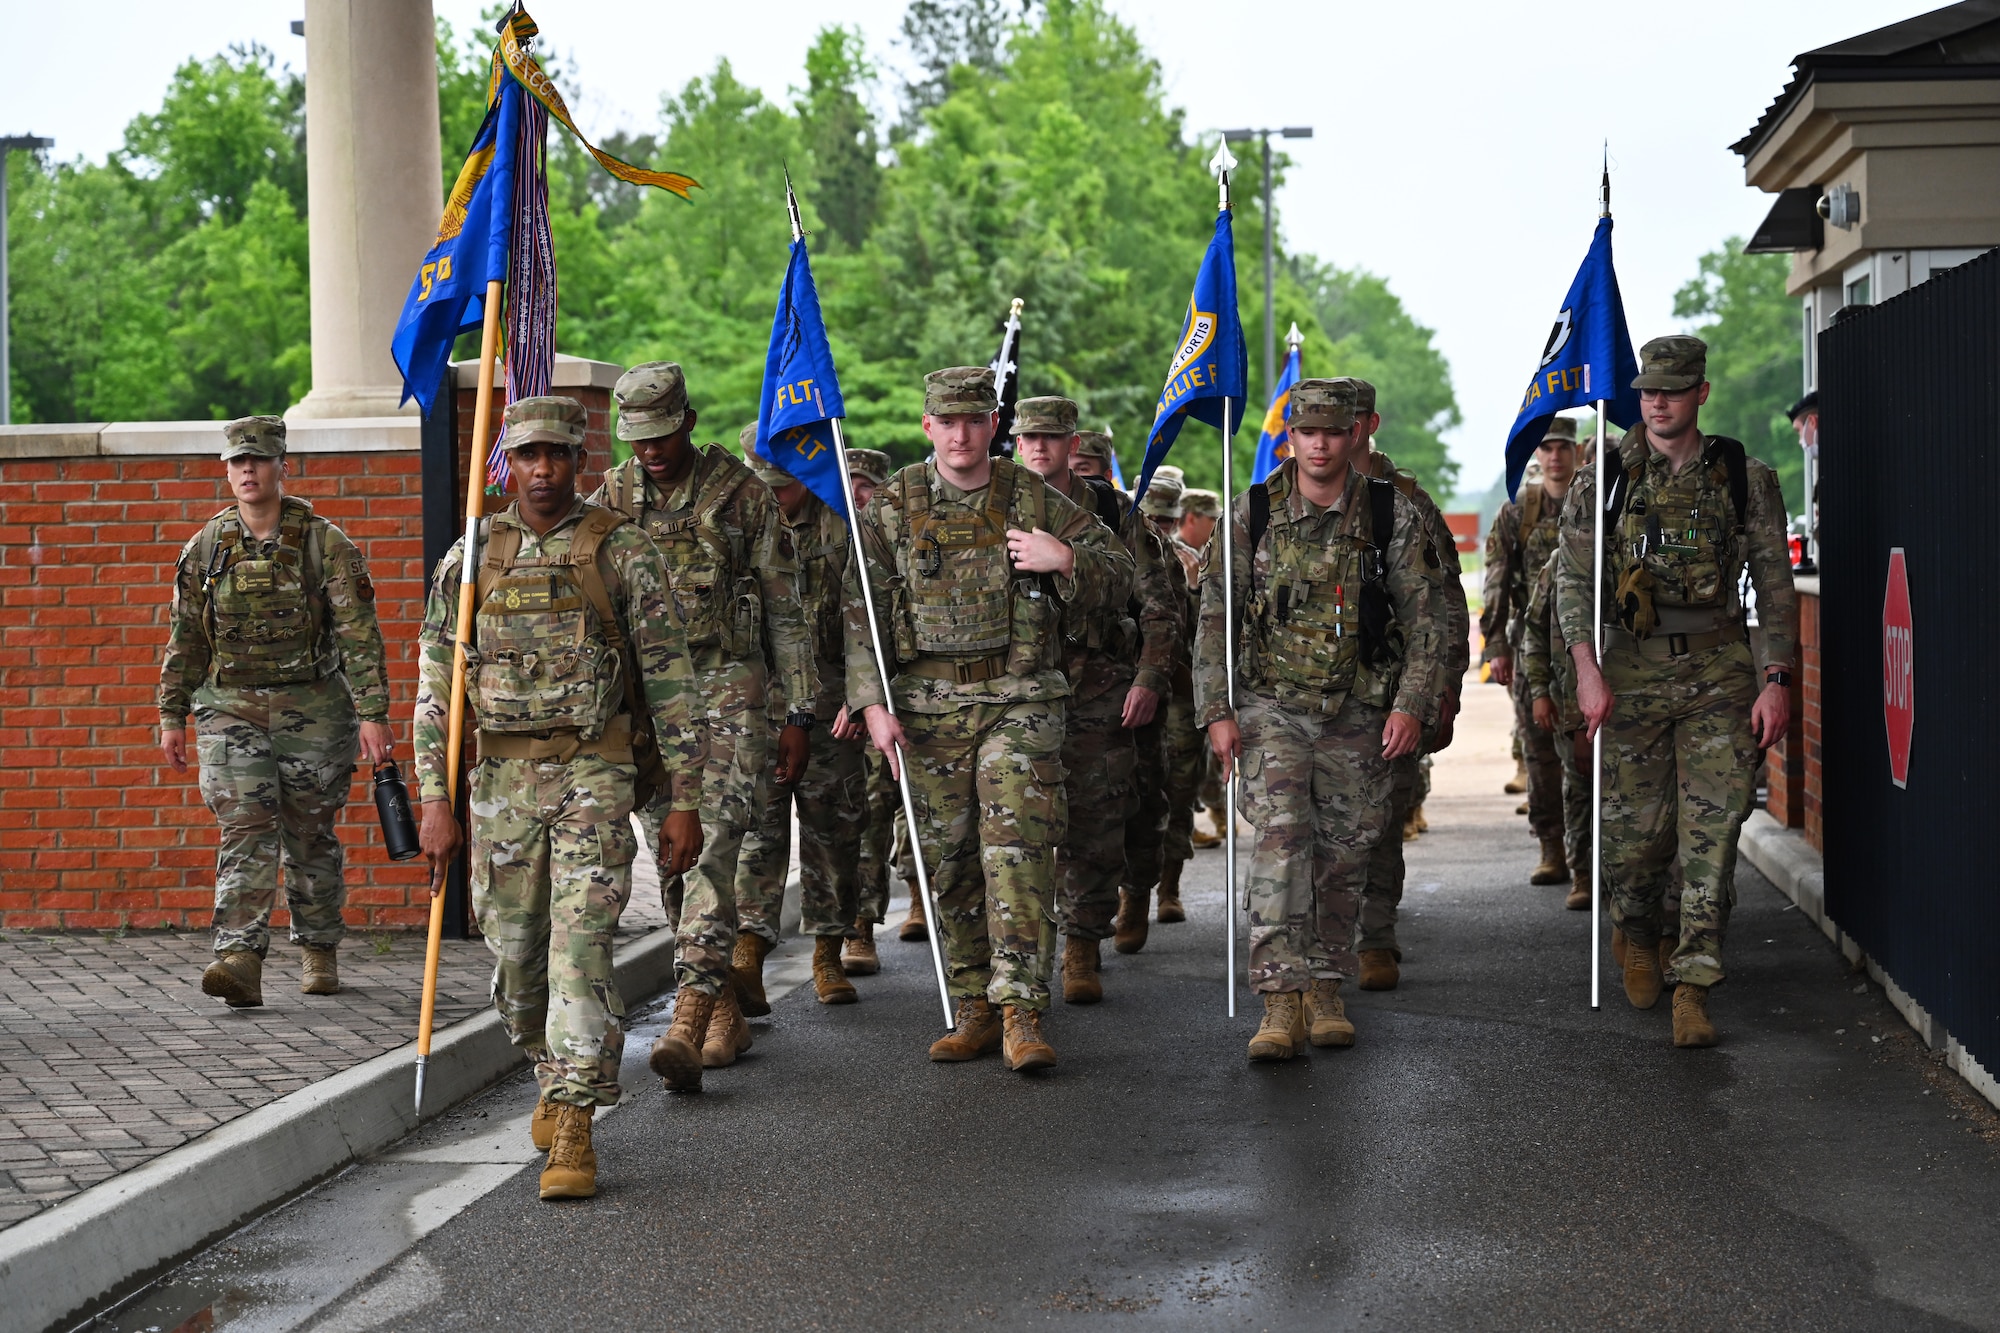 Members of Team BLAZE march through the main gate May 10, 2021, on Columbus Air Force Base, Mississippi. National Police Week at Columbus AFB is held to recognize security forces and local law enforcement personnel who defend the base. (U.S. Air Force photo by Senior Airman Jake Jacobsen)